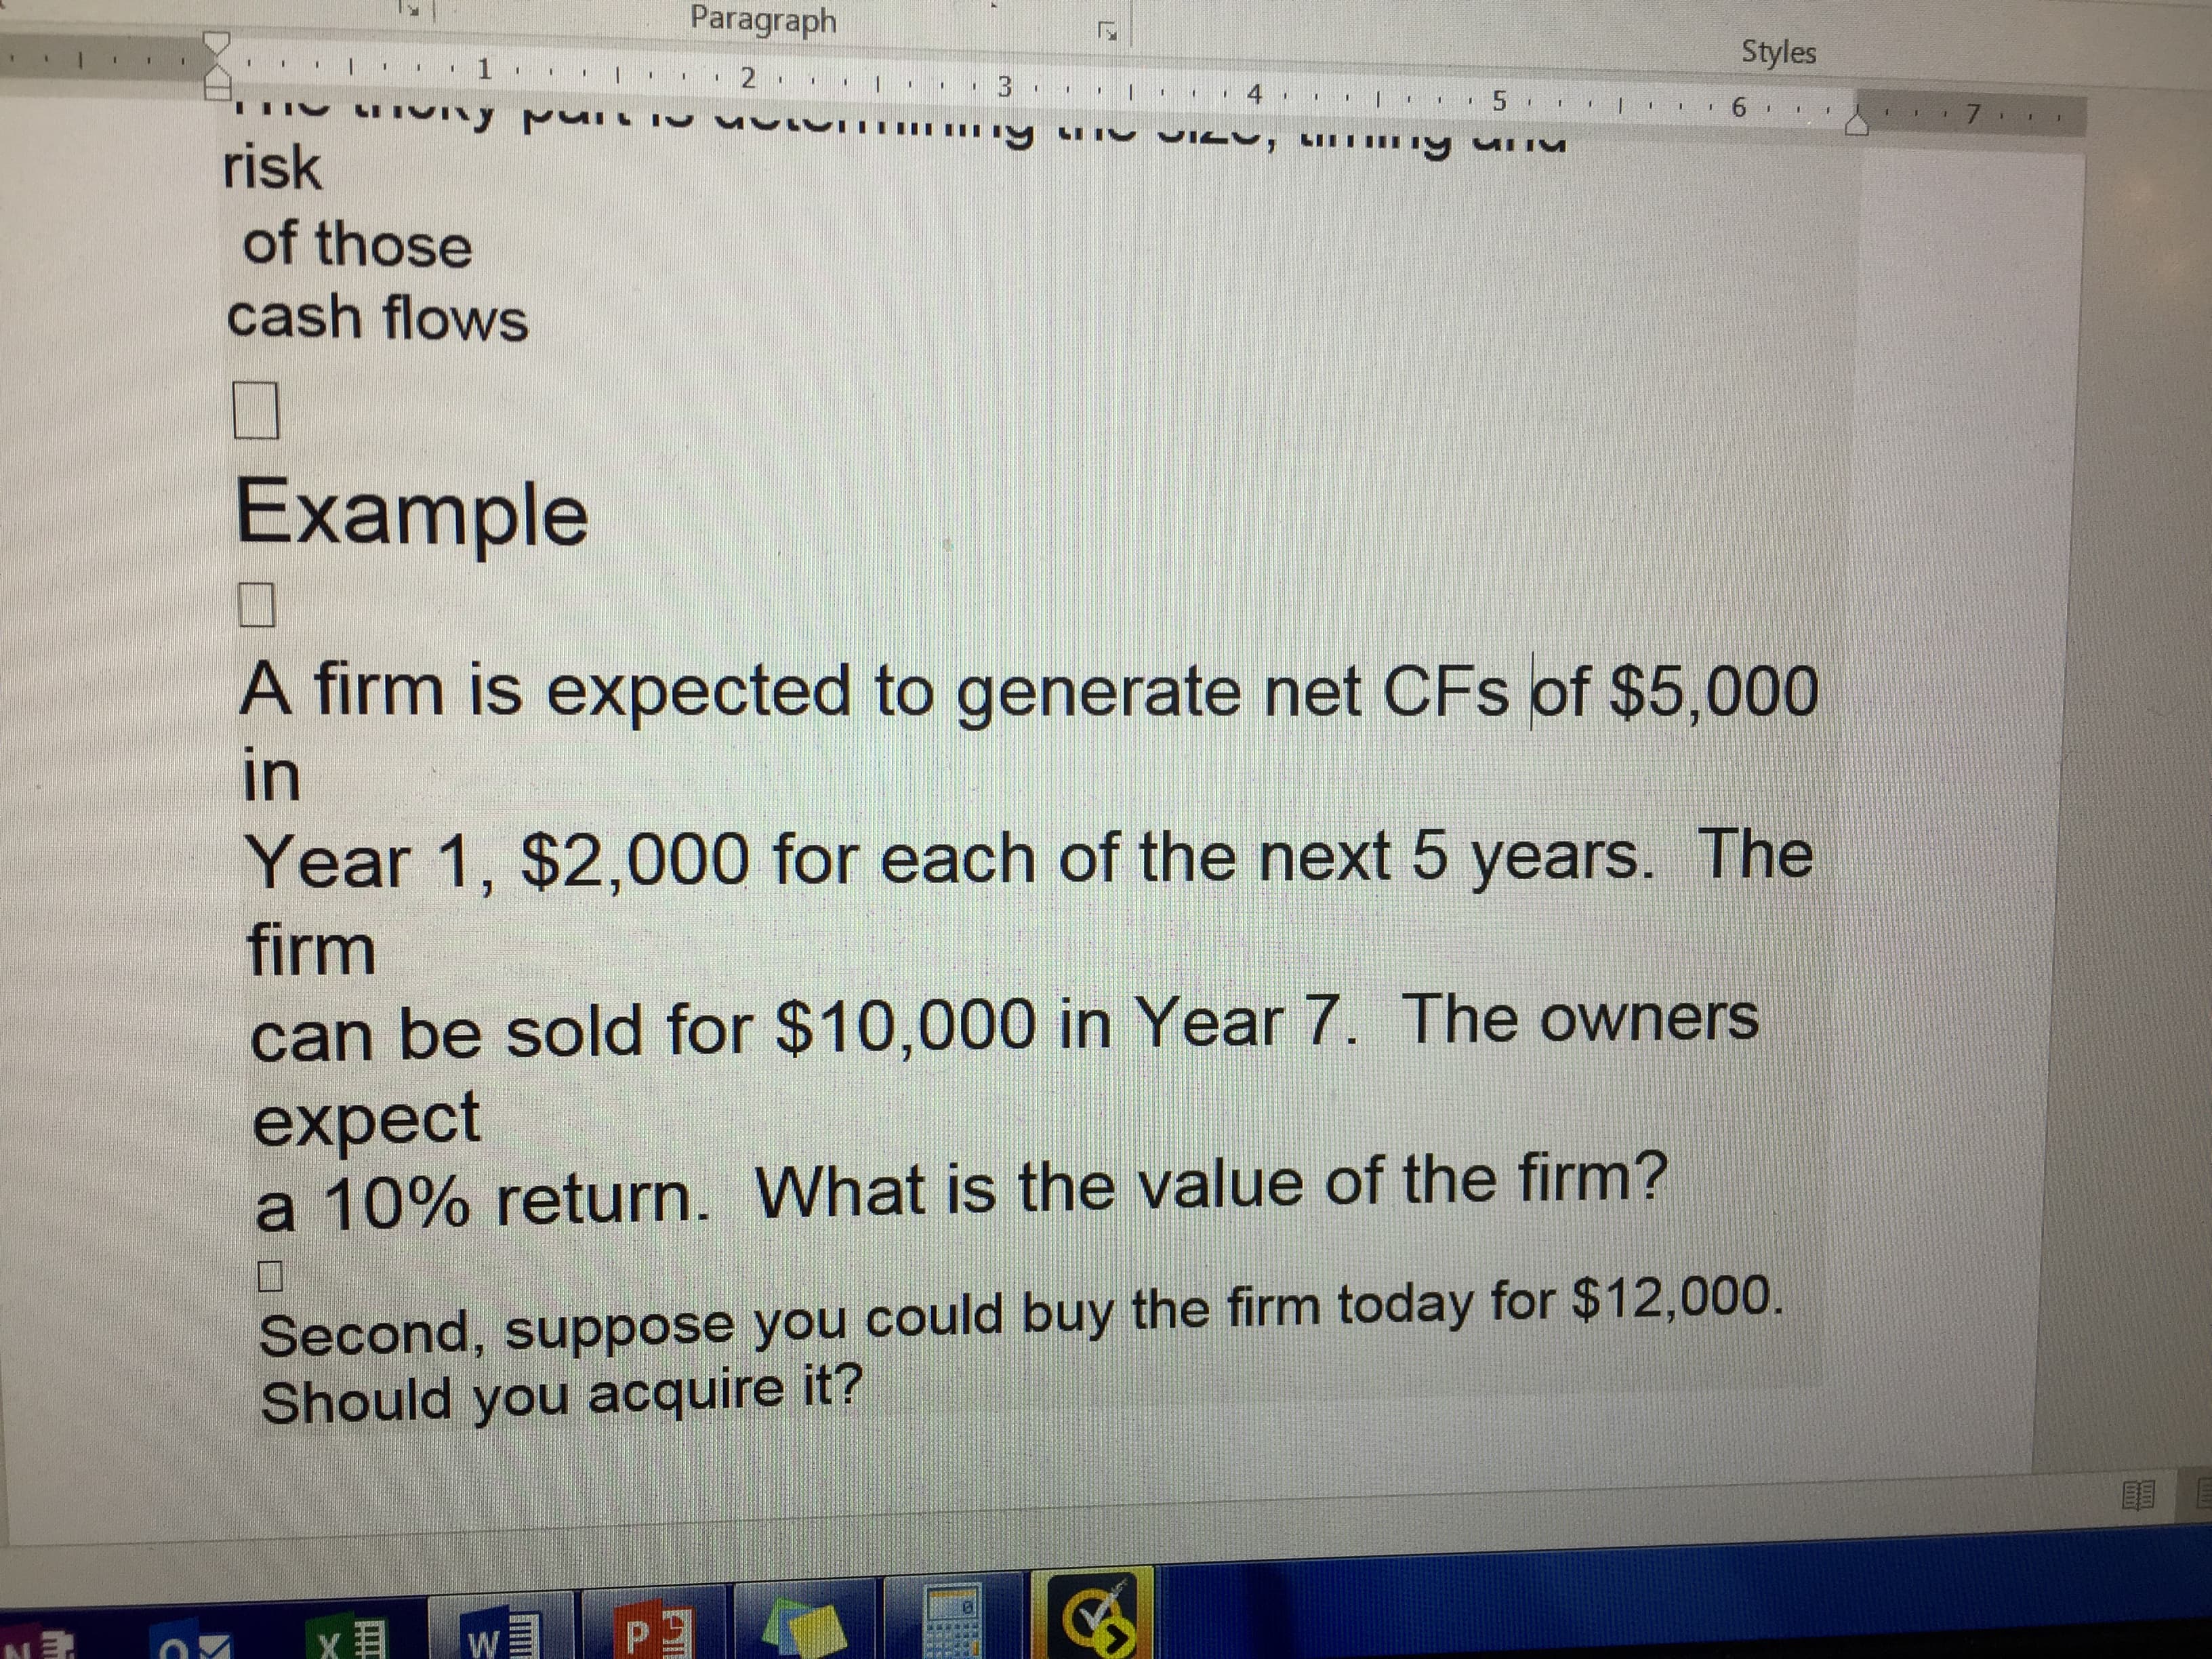 Paragraph
Styles
1
2
I 3
4
5
6
7
risk
of those
cash flows
Example
A firm is expected to generate net CFs of $5,000
in
Year 1, $2,000 for each of the next 5 years. The
firm
can be sold for $10,000 in Year 7. The owners
expect
a 10% return. What is the value of the firm?
Second, suppose you could buy the firm today for $12,000.
Should you acquire it?
W
